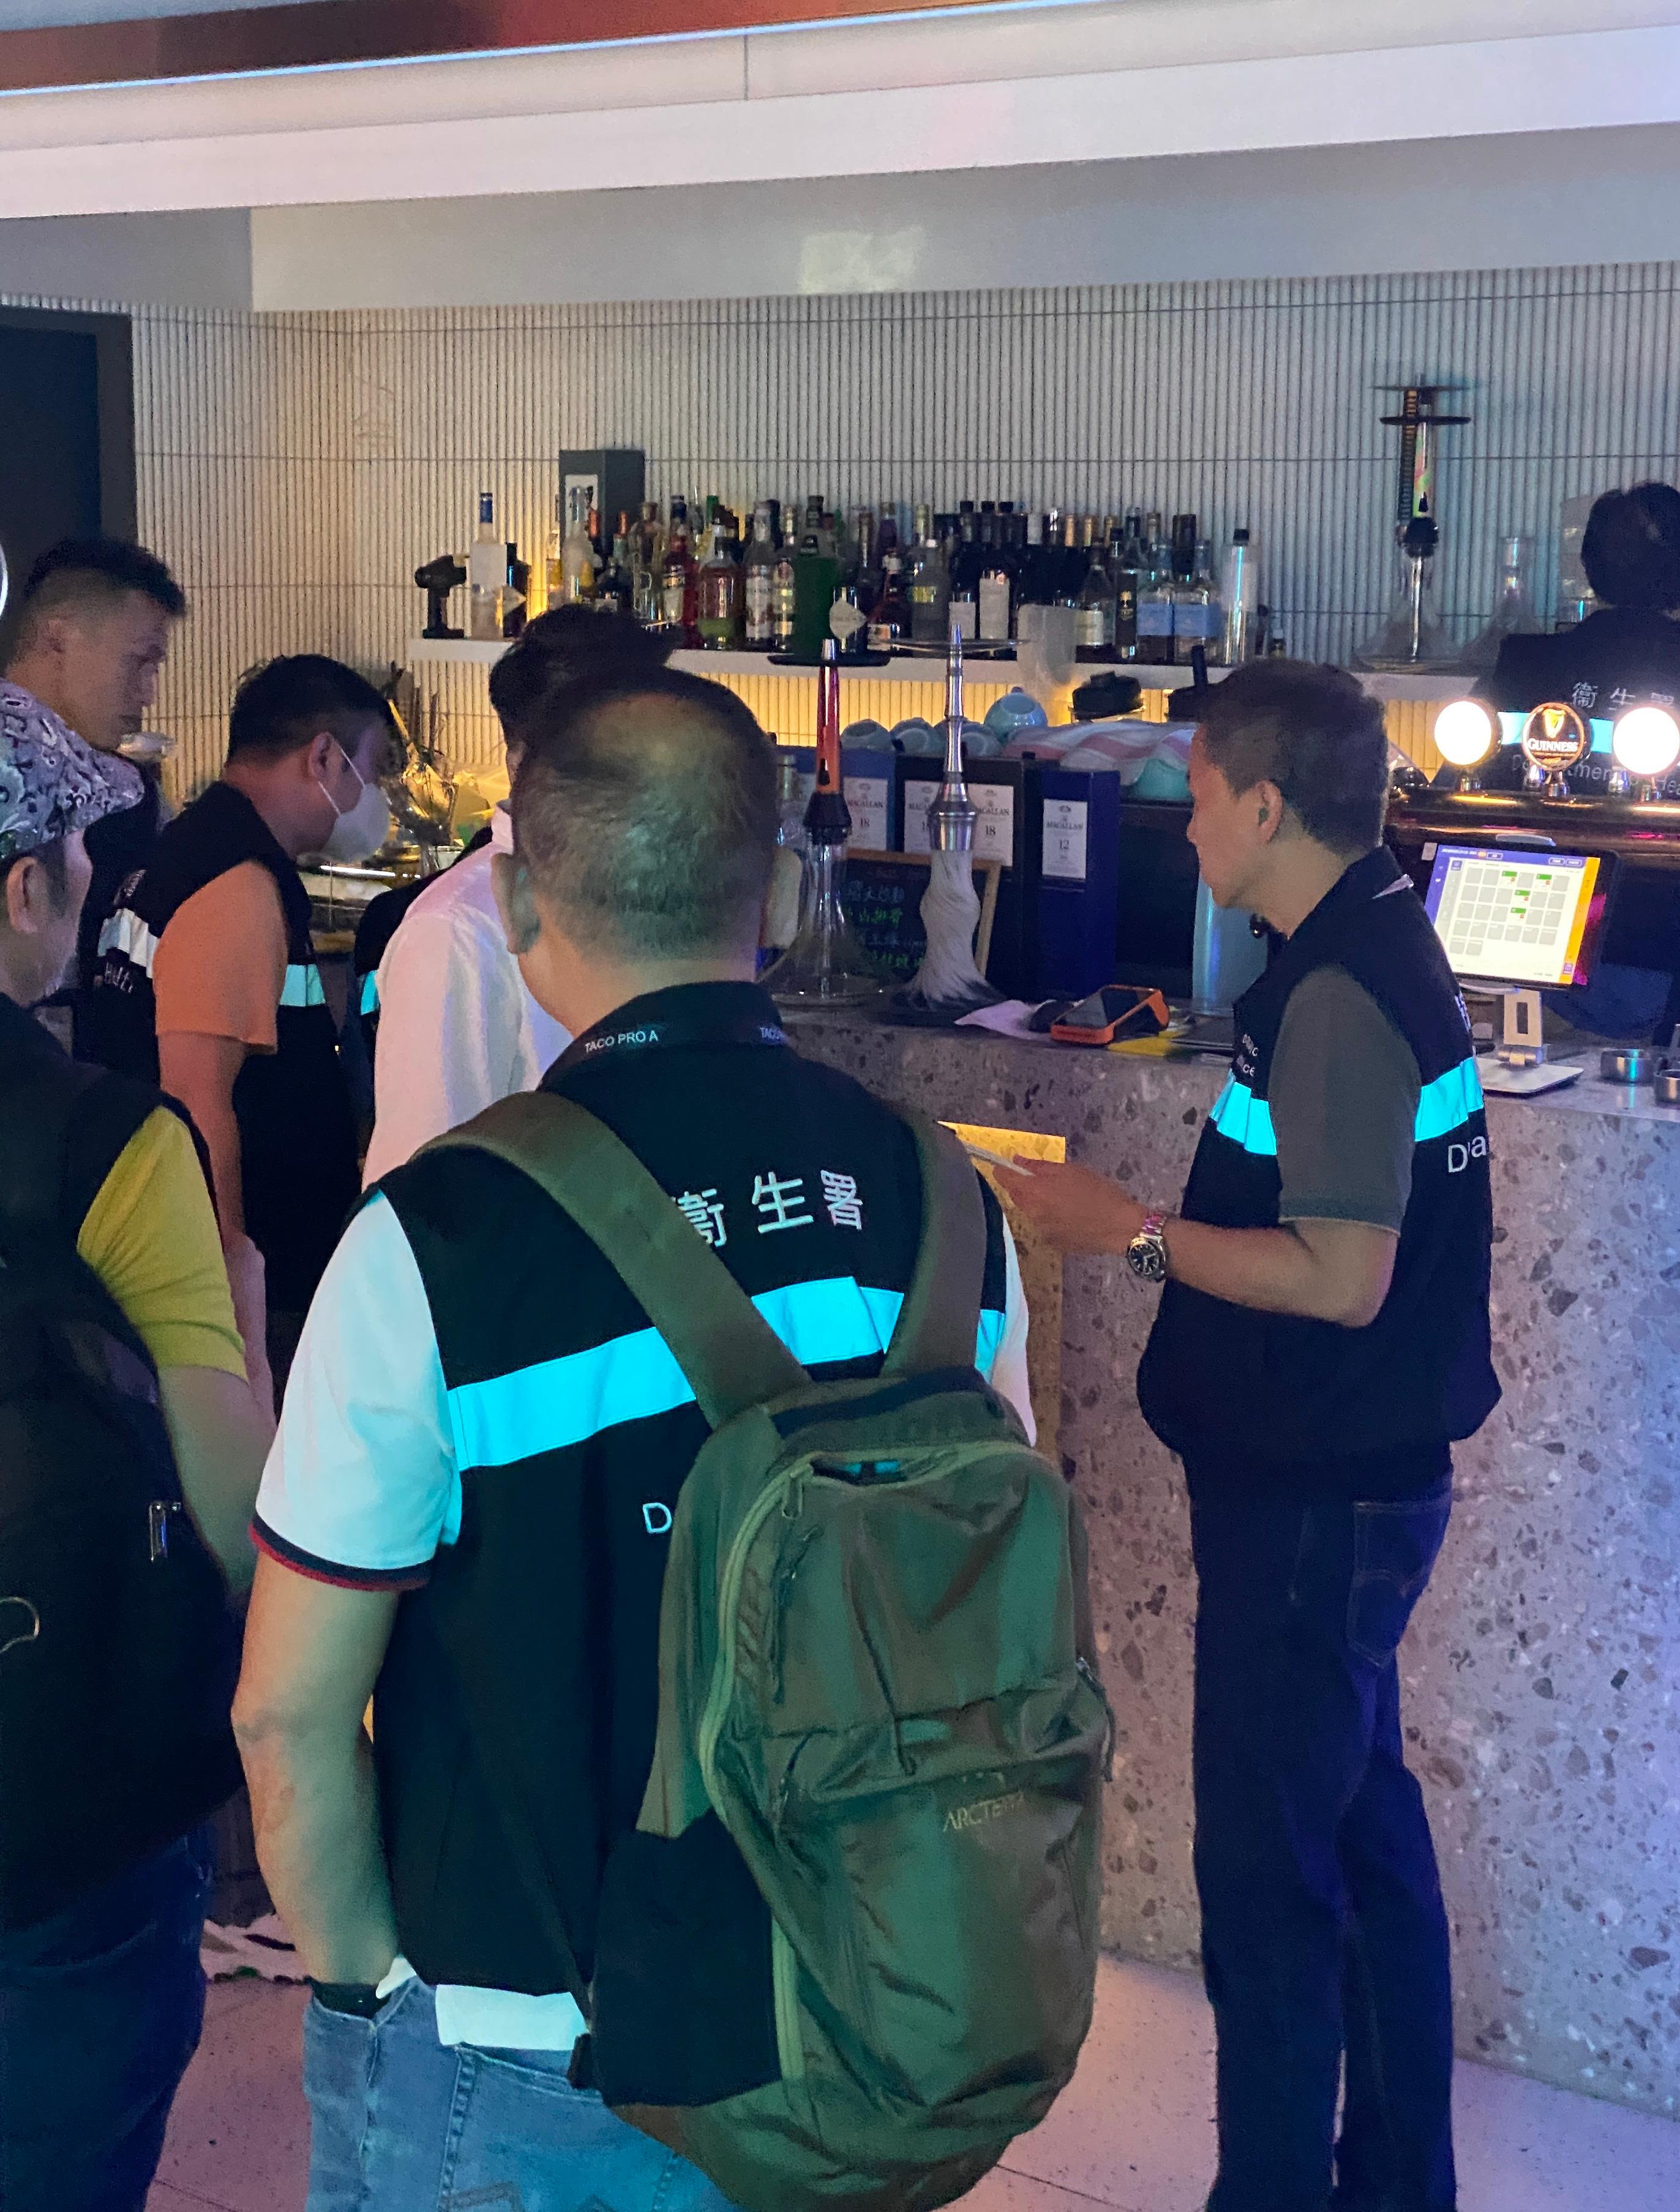 The Tobacco and Alcohol Control Office of the Department of Health conducted a joint operation with the Police against illegal waterpipe smoking activities in no smoking areas in Tsim Sha Tsui last night (May 5). Photo shows law enforcement officers taking enforcement actions at a bar in Tsim Sha Tsui.